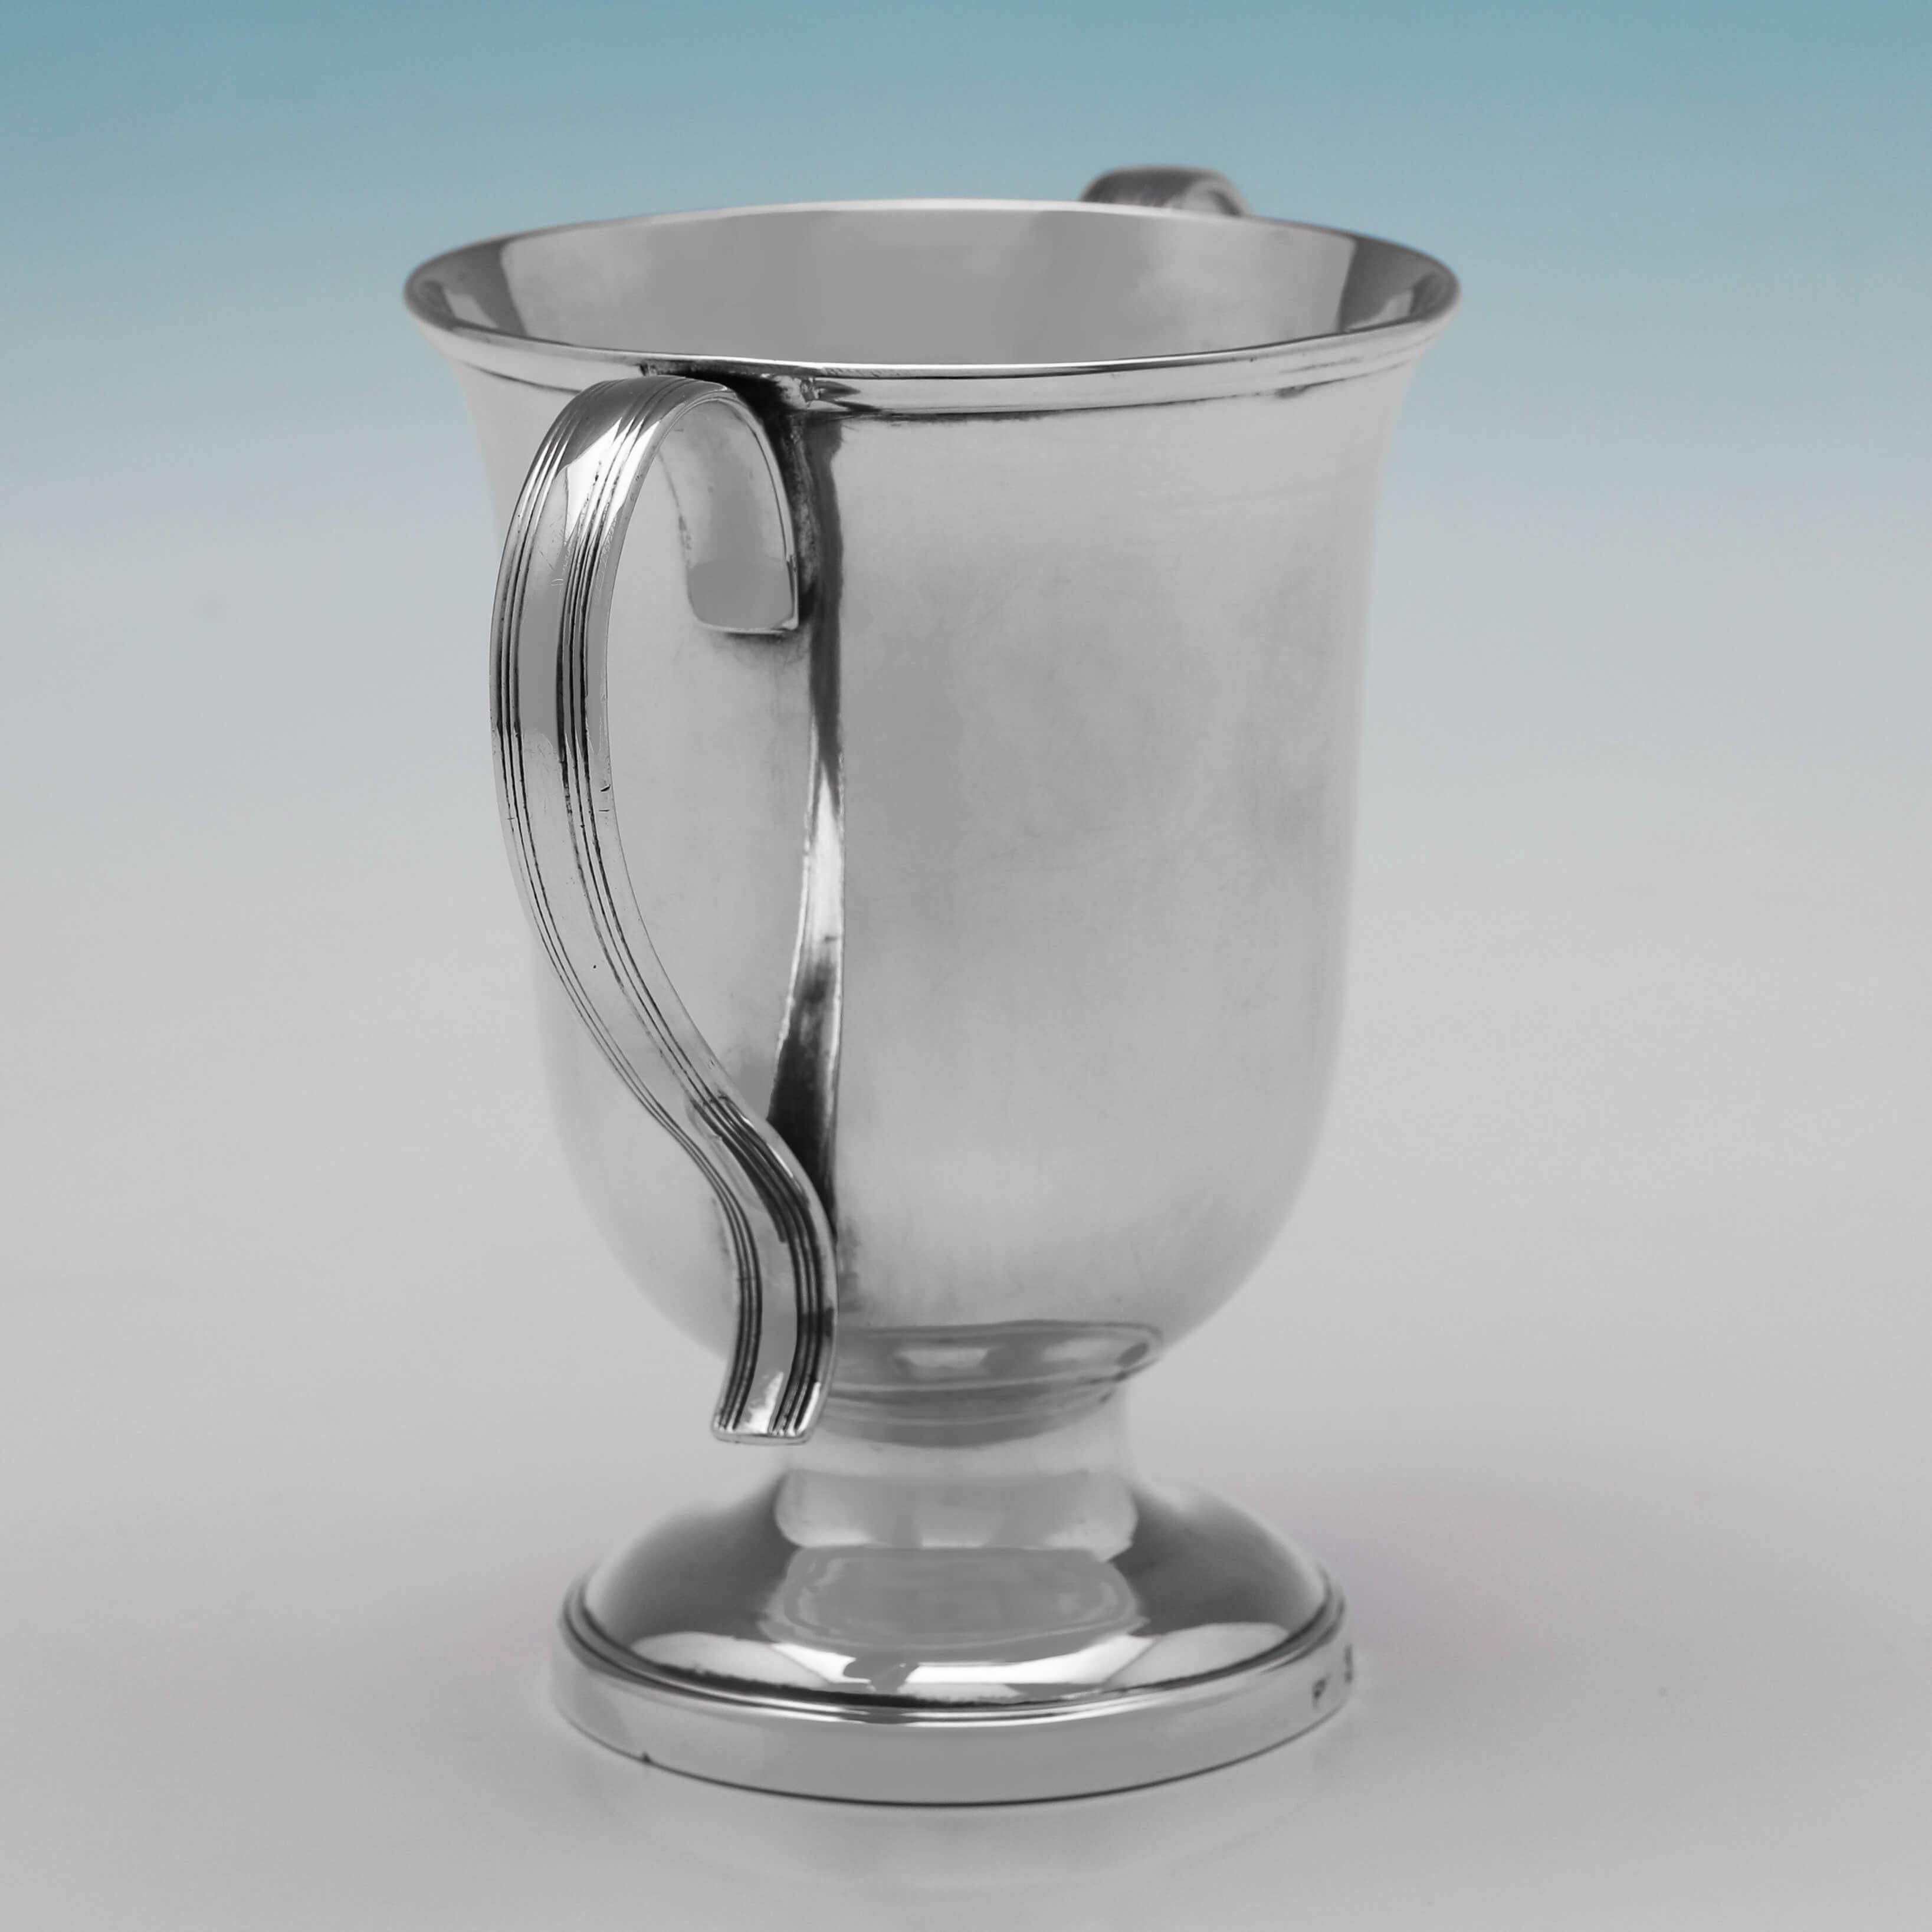 Hallmarked in Sheffield in 1803 by Eadon, Kibbles & Weaver, this this handsome, George III, Antique Sterling Silver Cup, is plain in style, and features two reed bordered loop handles, and a pedestal foot. 

The cup measures 4.5